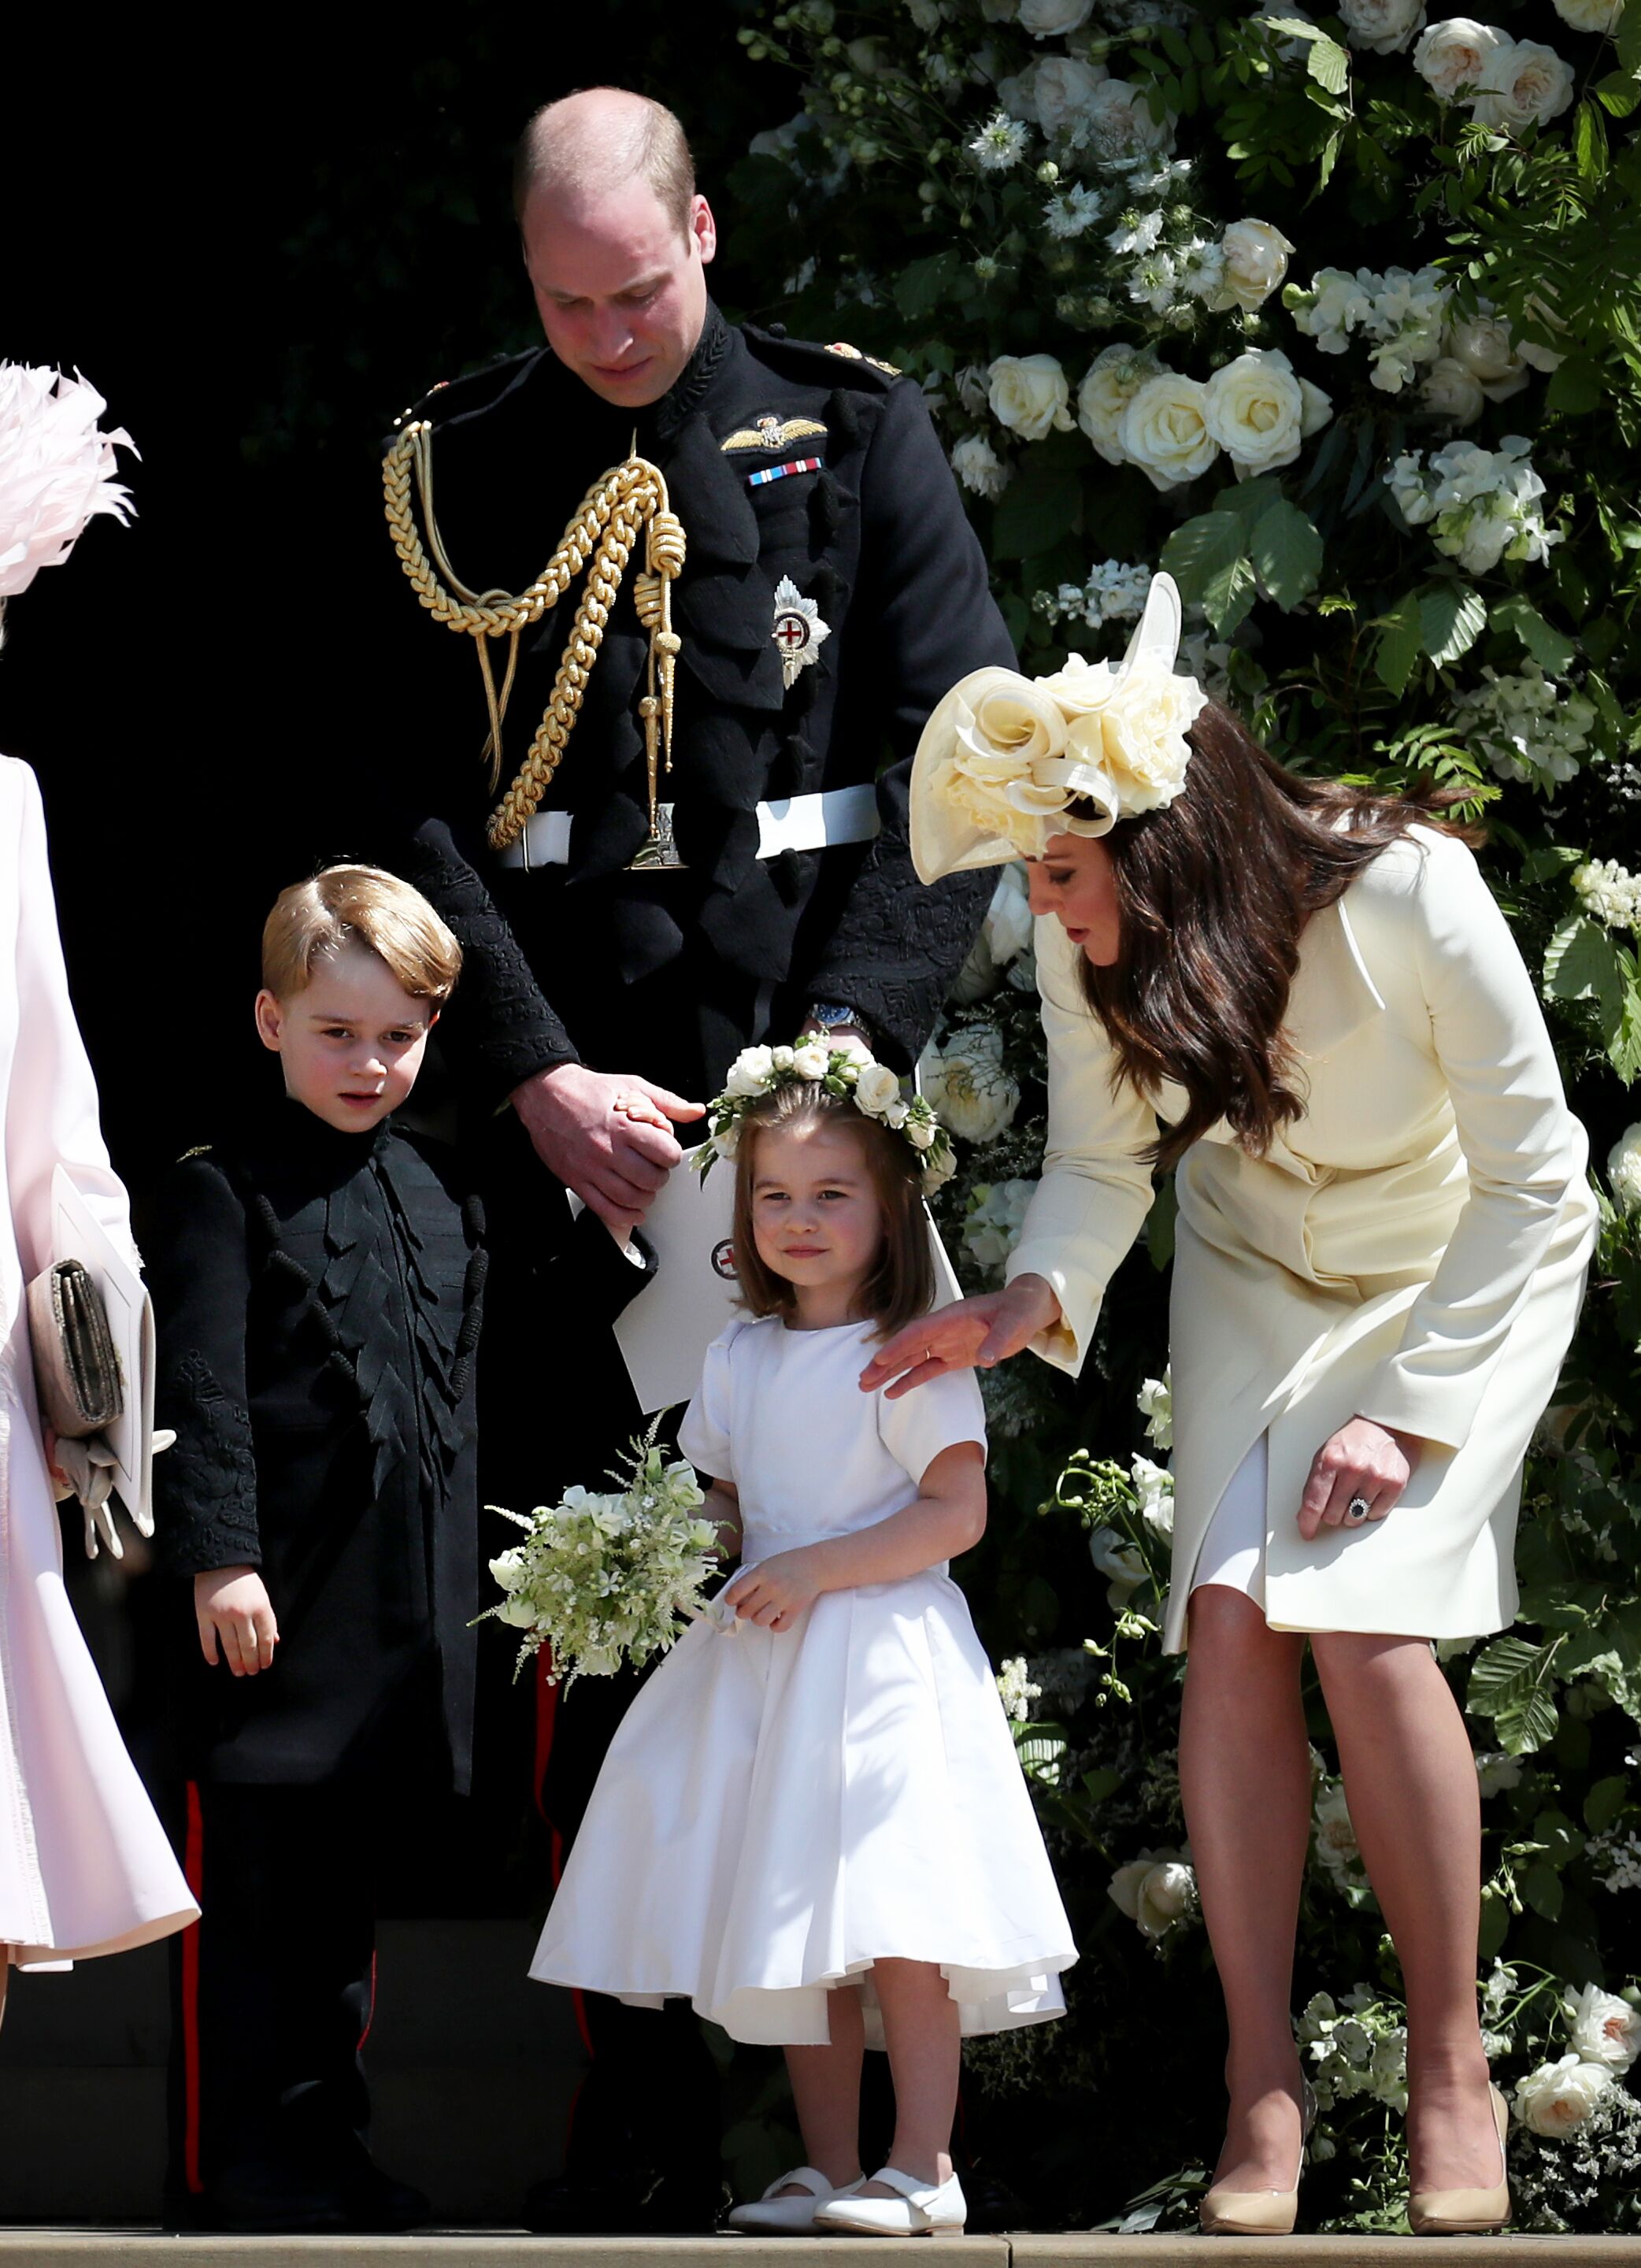 Prince William, Kate Middleton, Prince George and Princess Charlotte after the wedding of Prince Harry and Ms. Meghan Markle at St George's Chapel at Windsor Castle on May 19, 2018 in Windsor, England | Photo: Getty Images